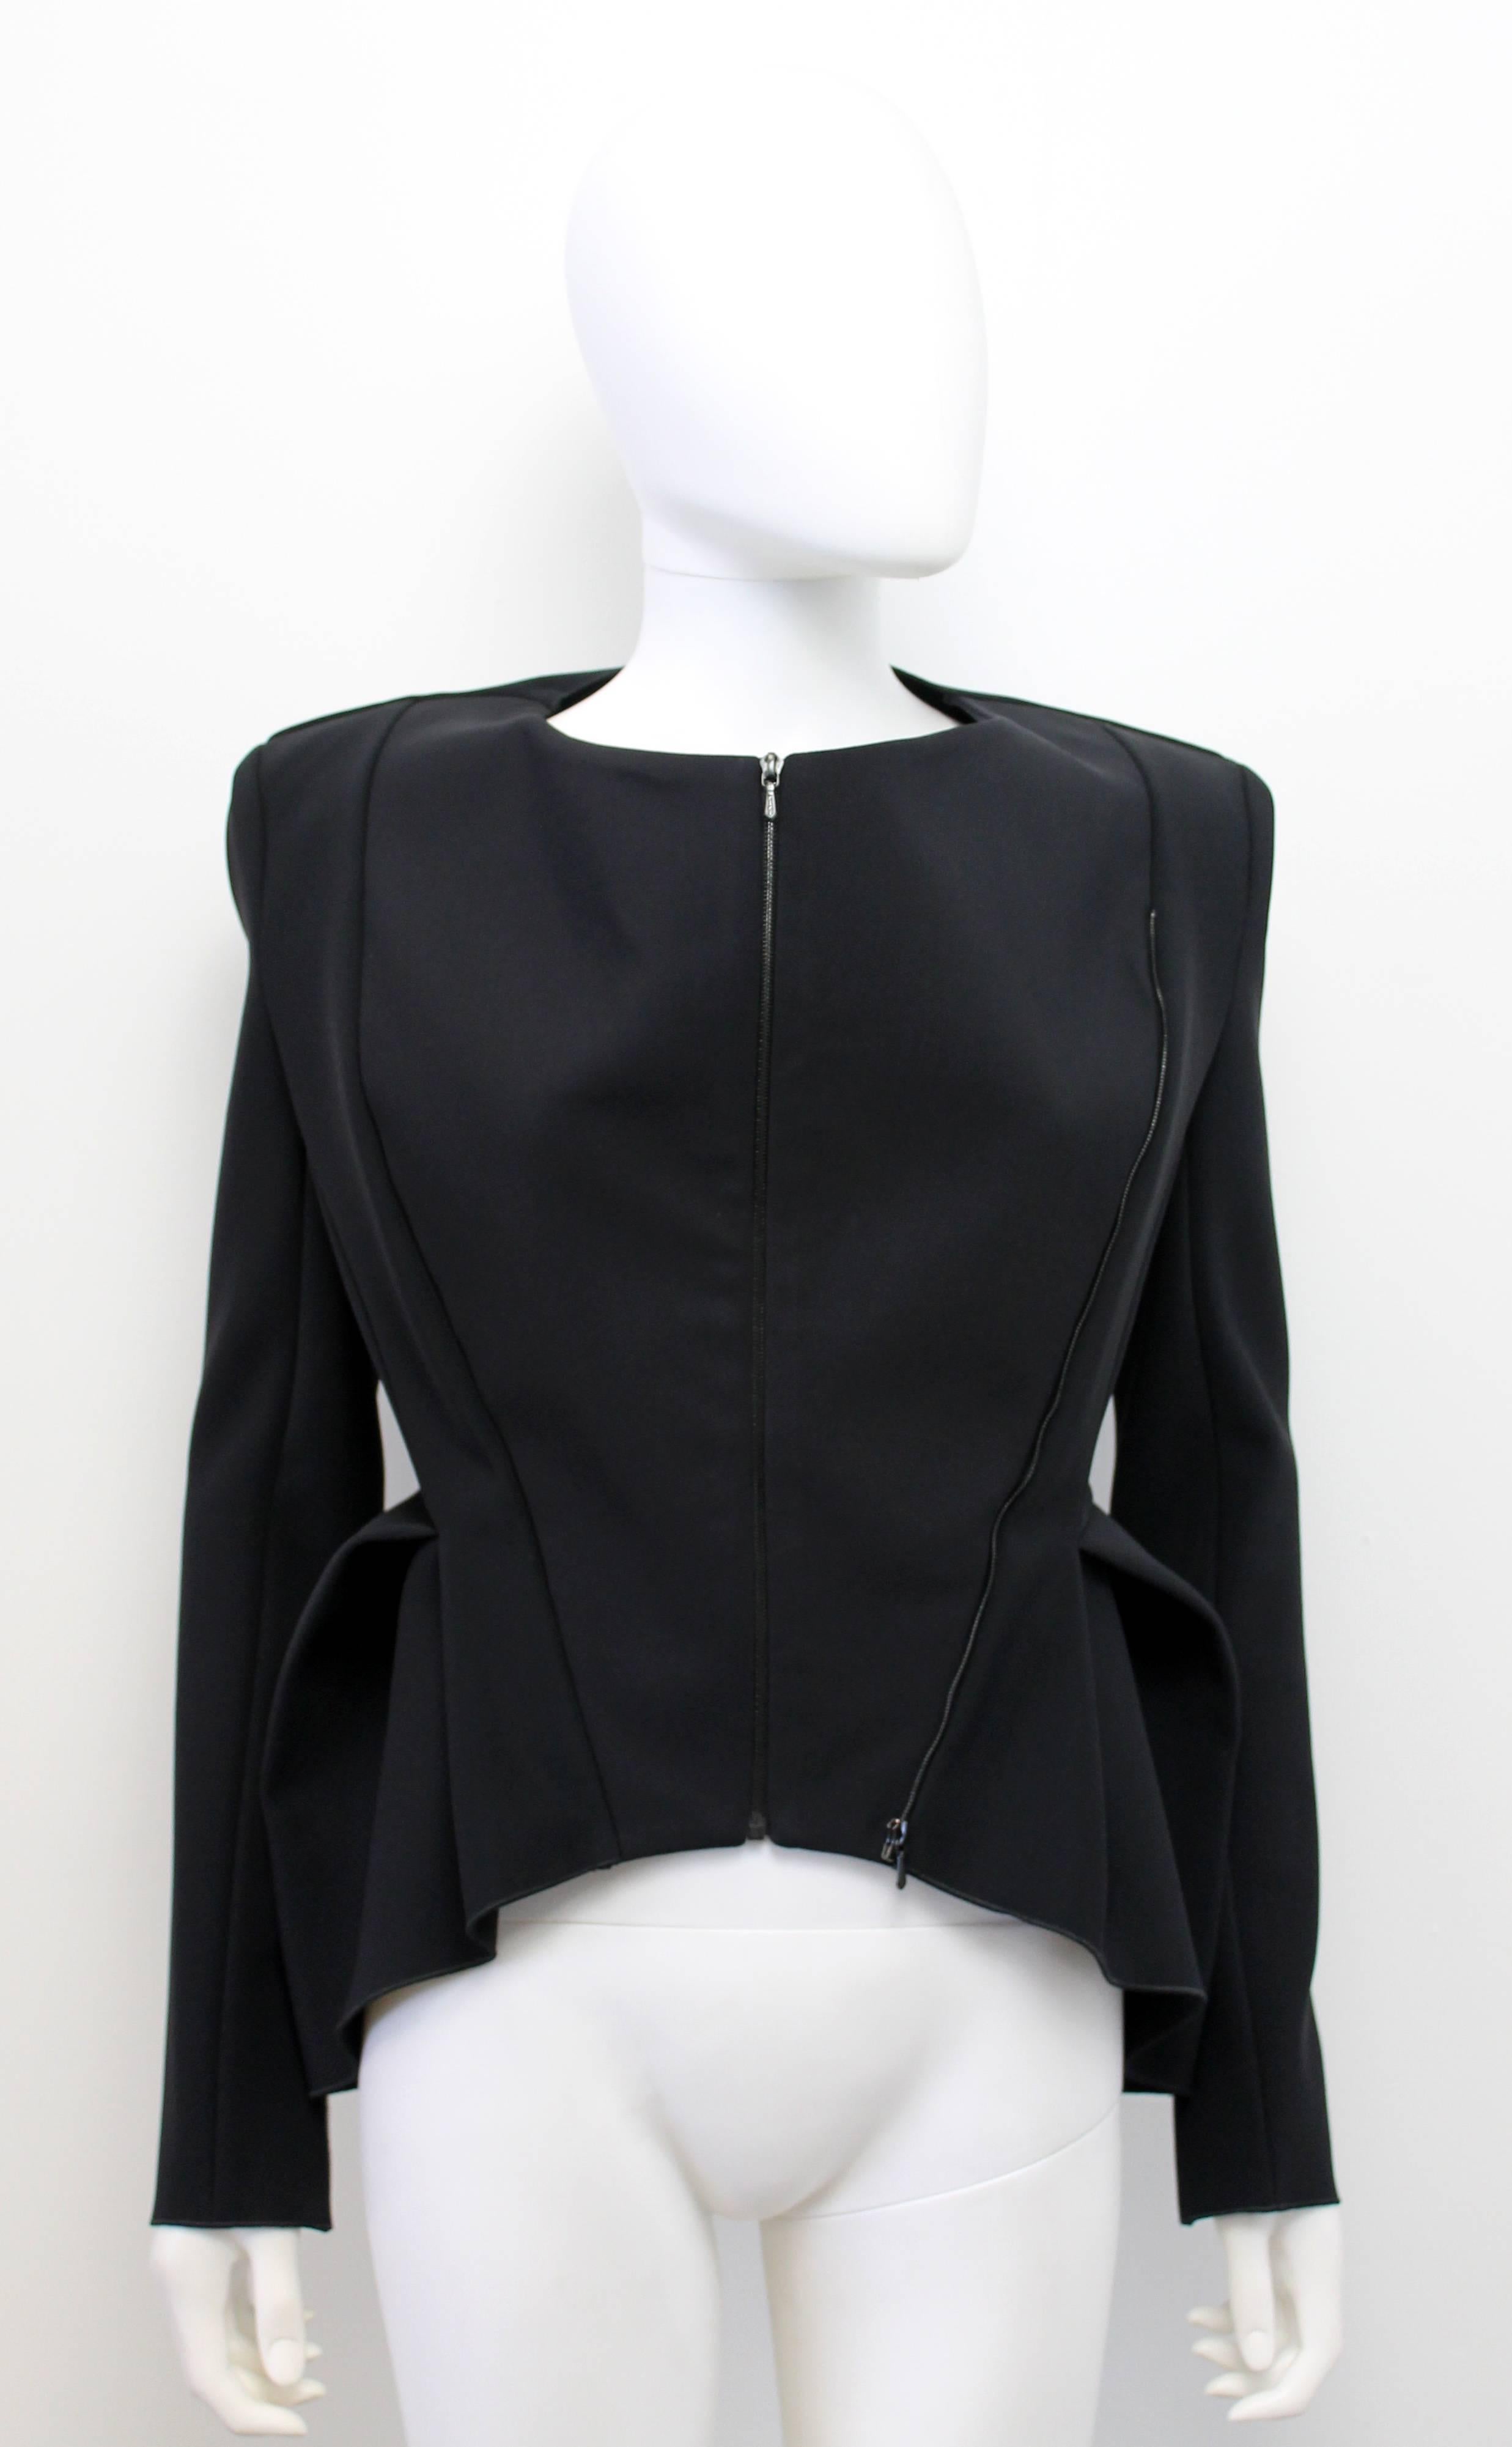 Incredible architectural jacket by Australian brand Dion Lee from Resort 2013. The front has two zip options to allow the wearer the option of a more fitted silhouette. Also features braid-like knots up the back. 